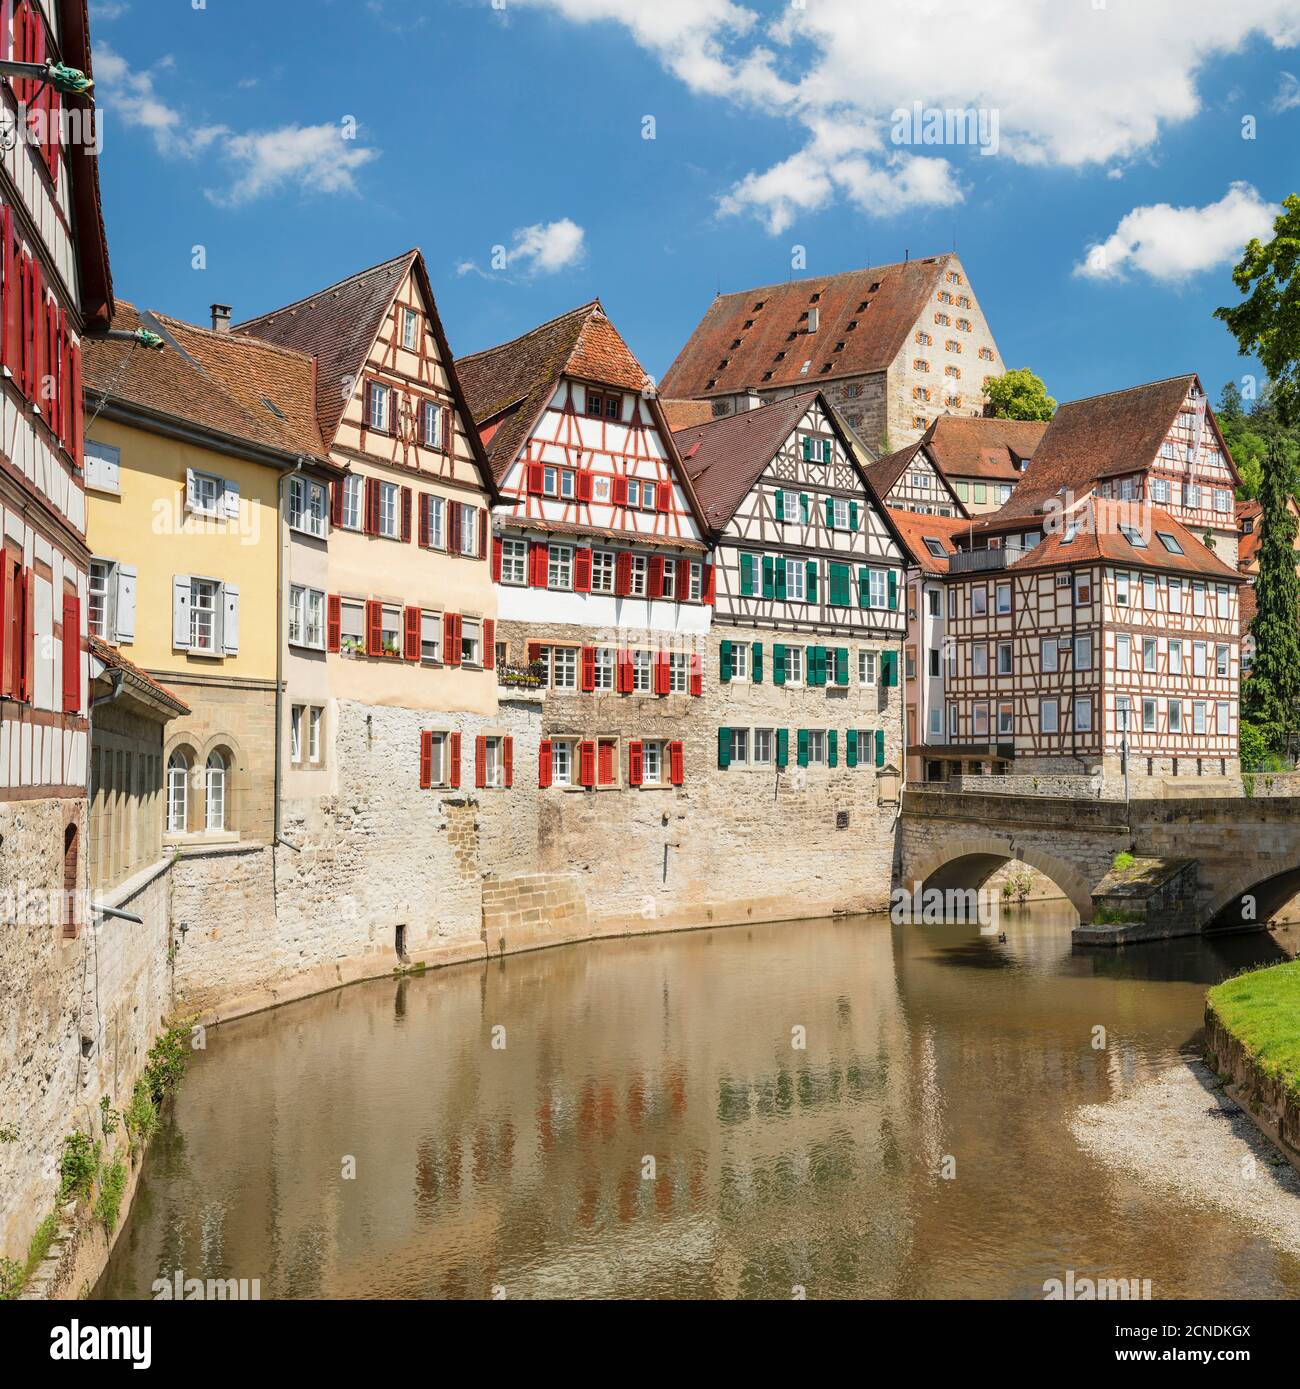 Half timbered houses in the old town, Schwaebisch Hall, Hohenlohe, Baden-Wurttemberg, Germany, Europe Stock Photo